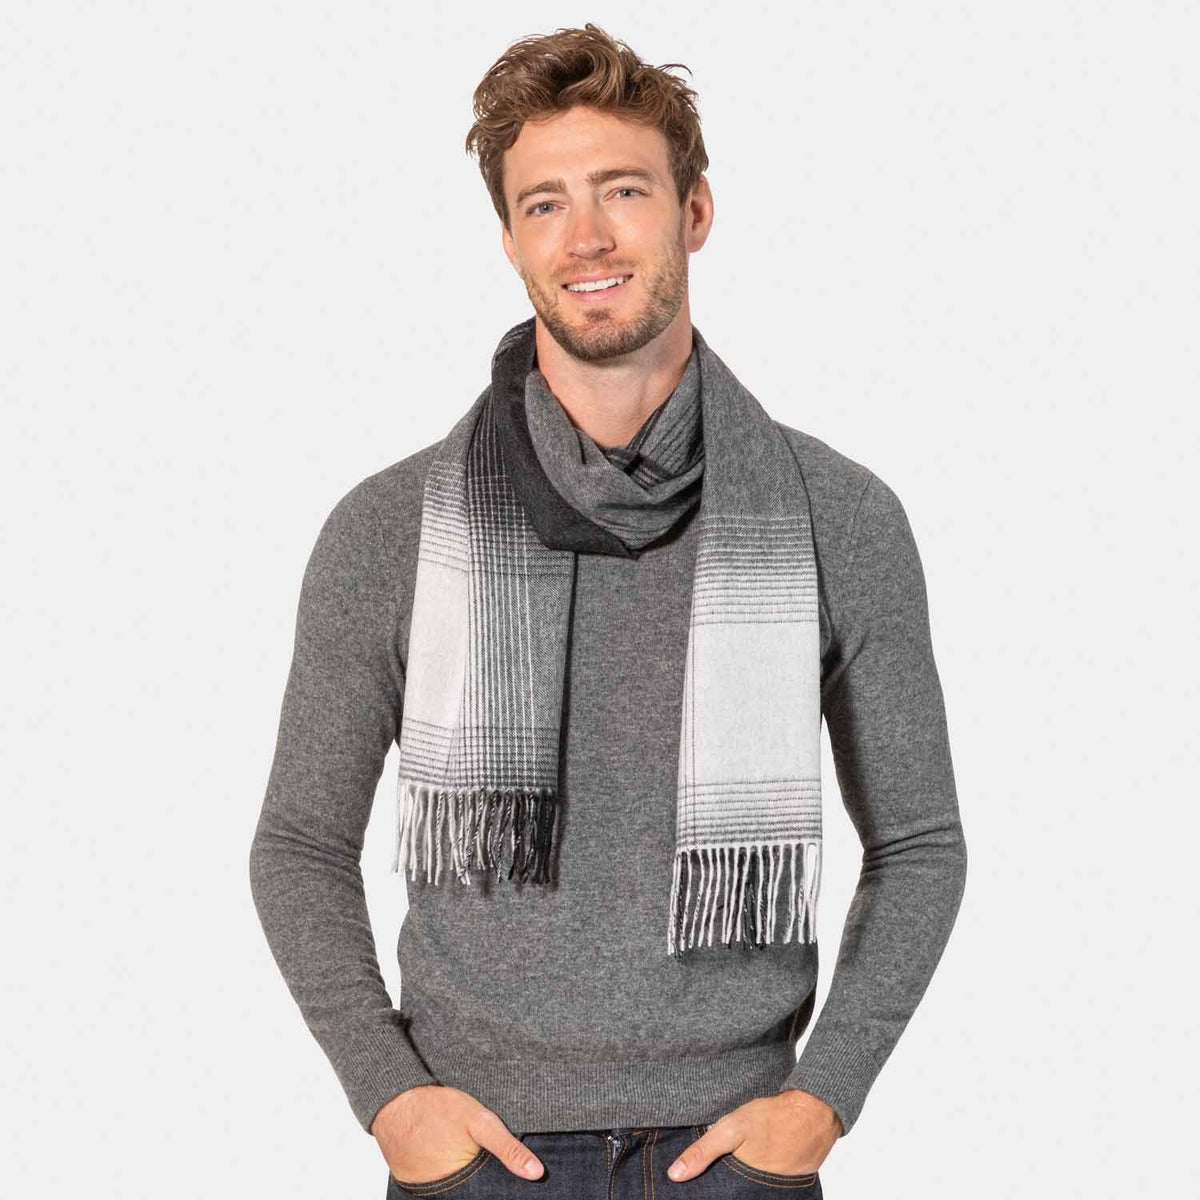 Picture of a man wearing an ombre cashmere scarf in grey and cream tones.